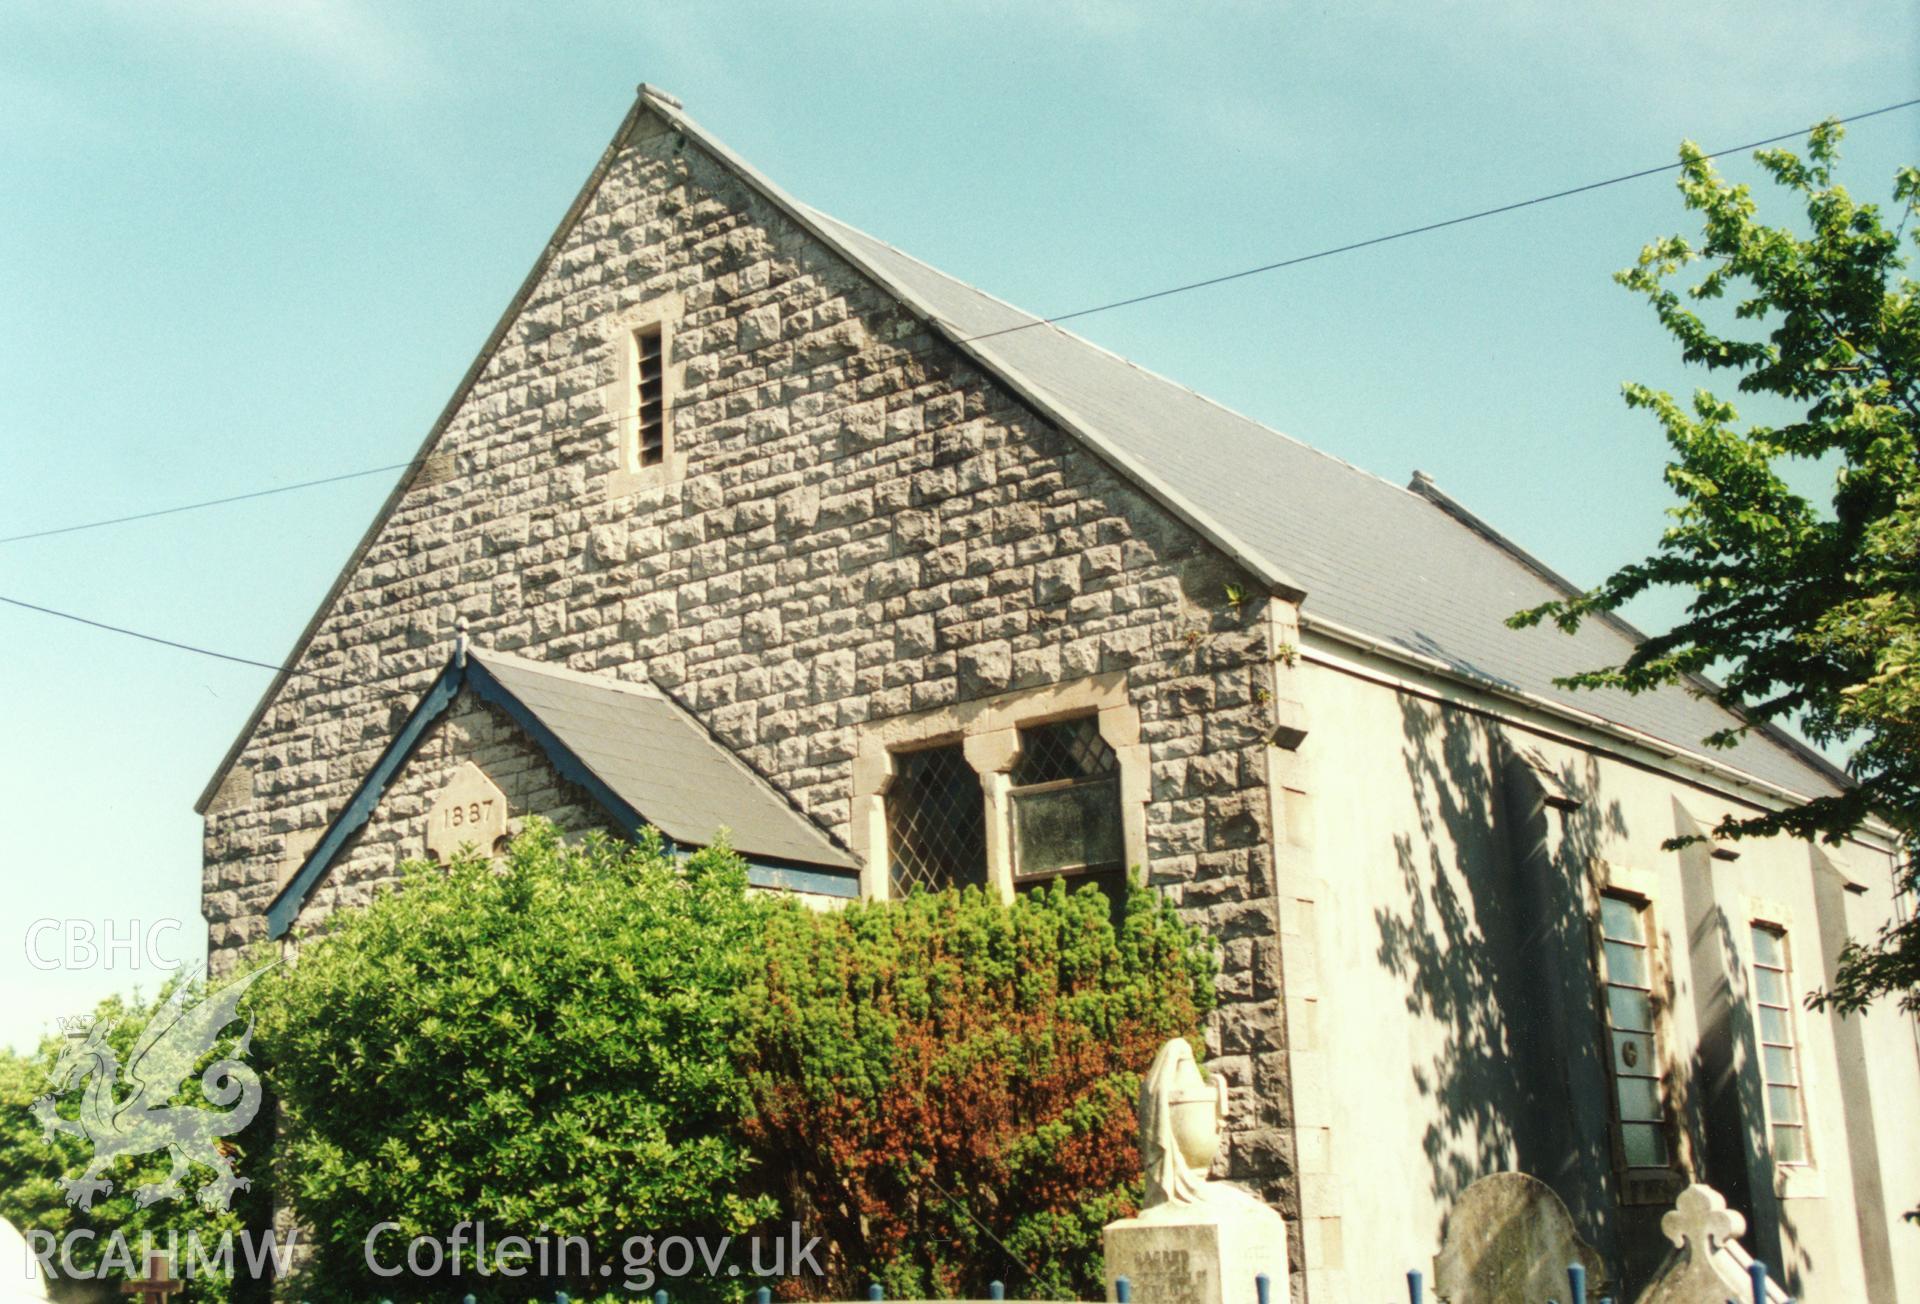 Digital copy of a colour photograph showing an exterior view of Penally Congregational Chapel,  taken by Robert Scourfield, 1996.